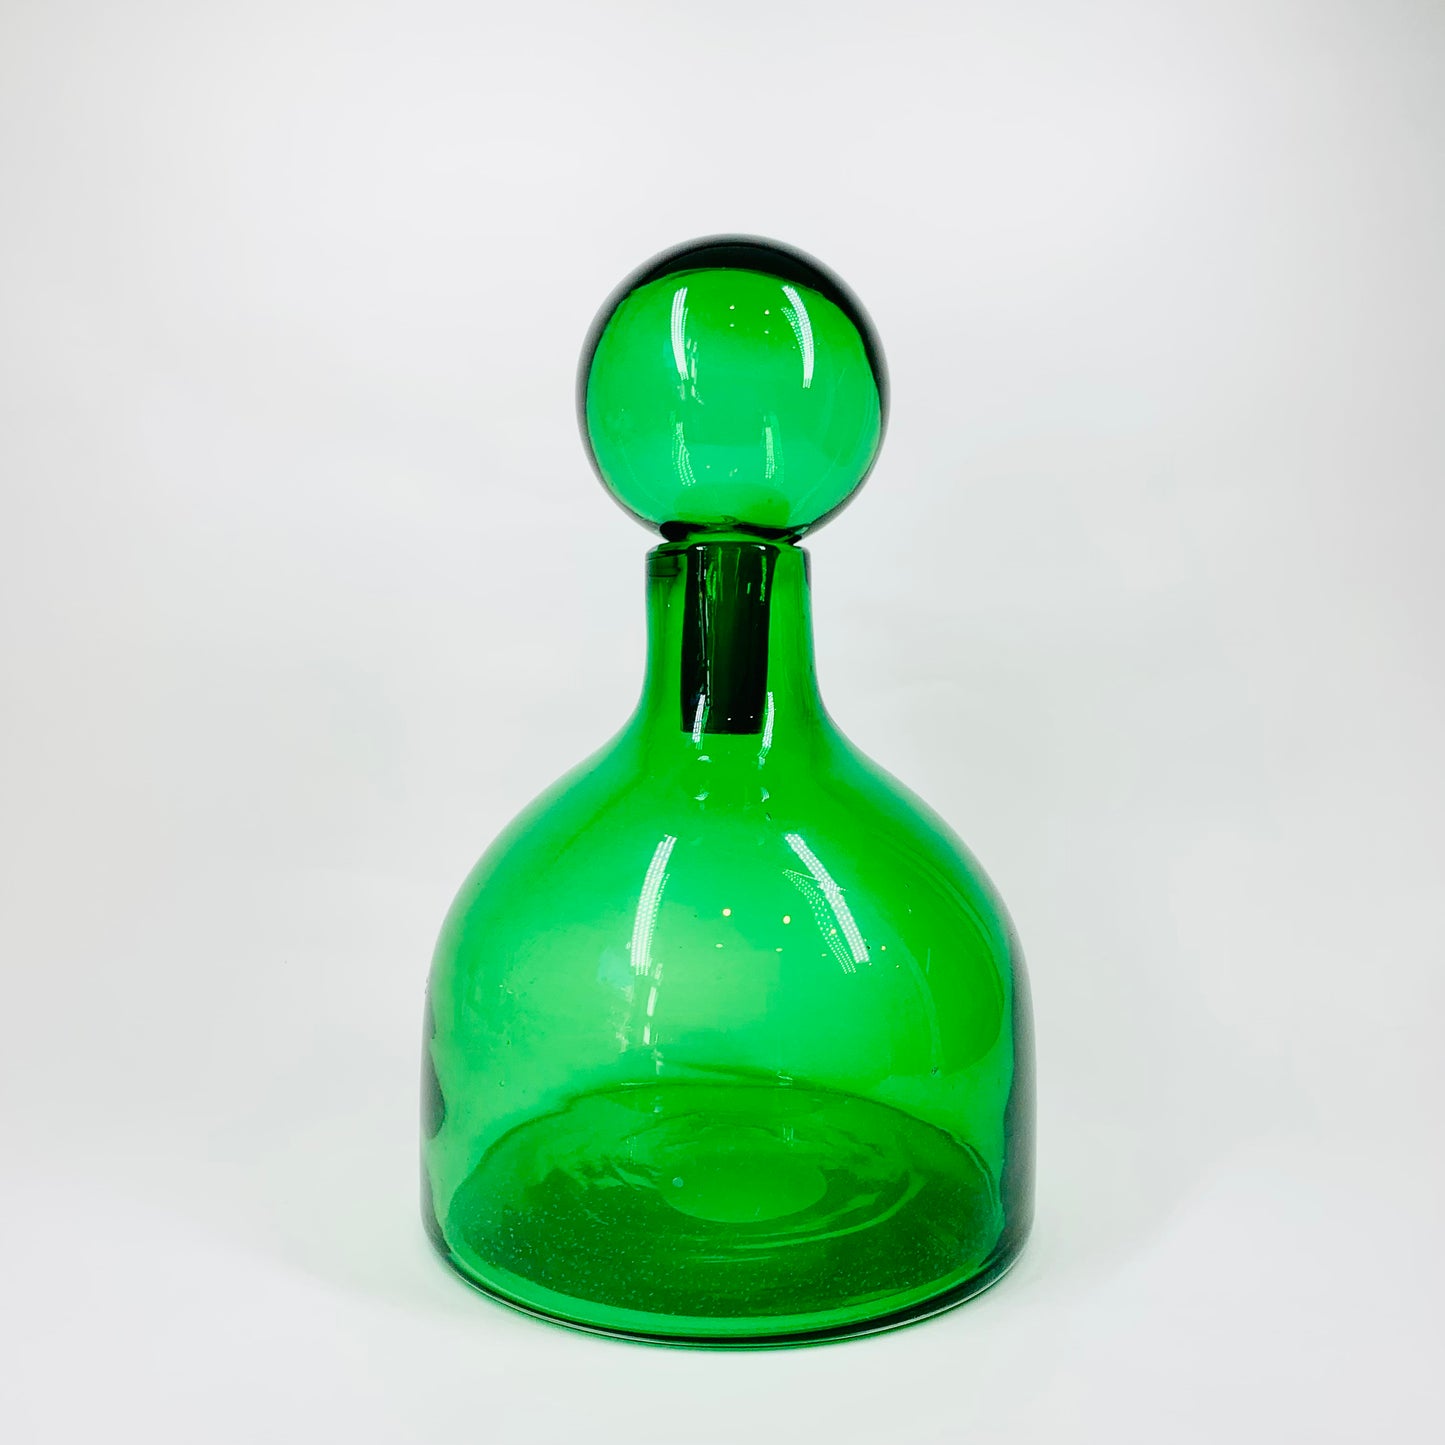 Rare mouth blown vintage Pols Potten green glass decanter bottle with matching stopper